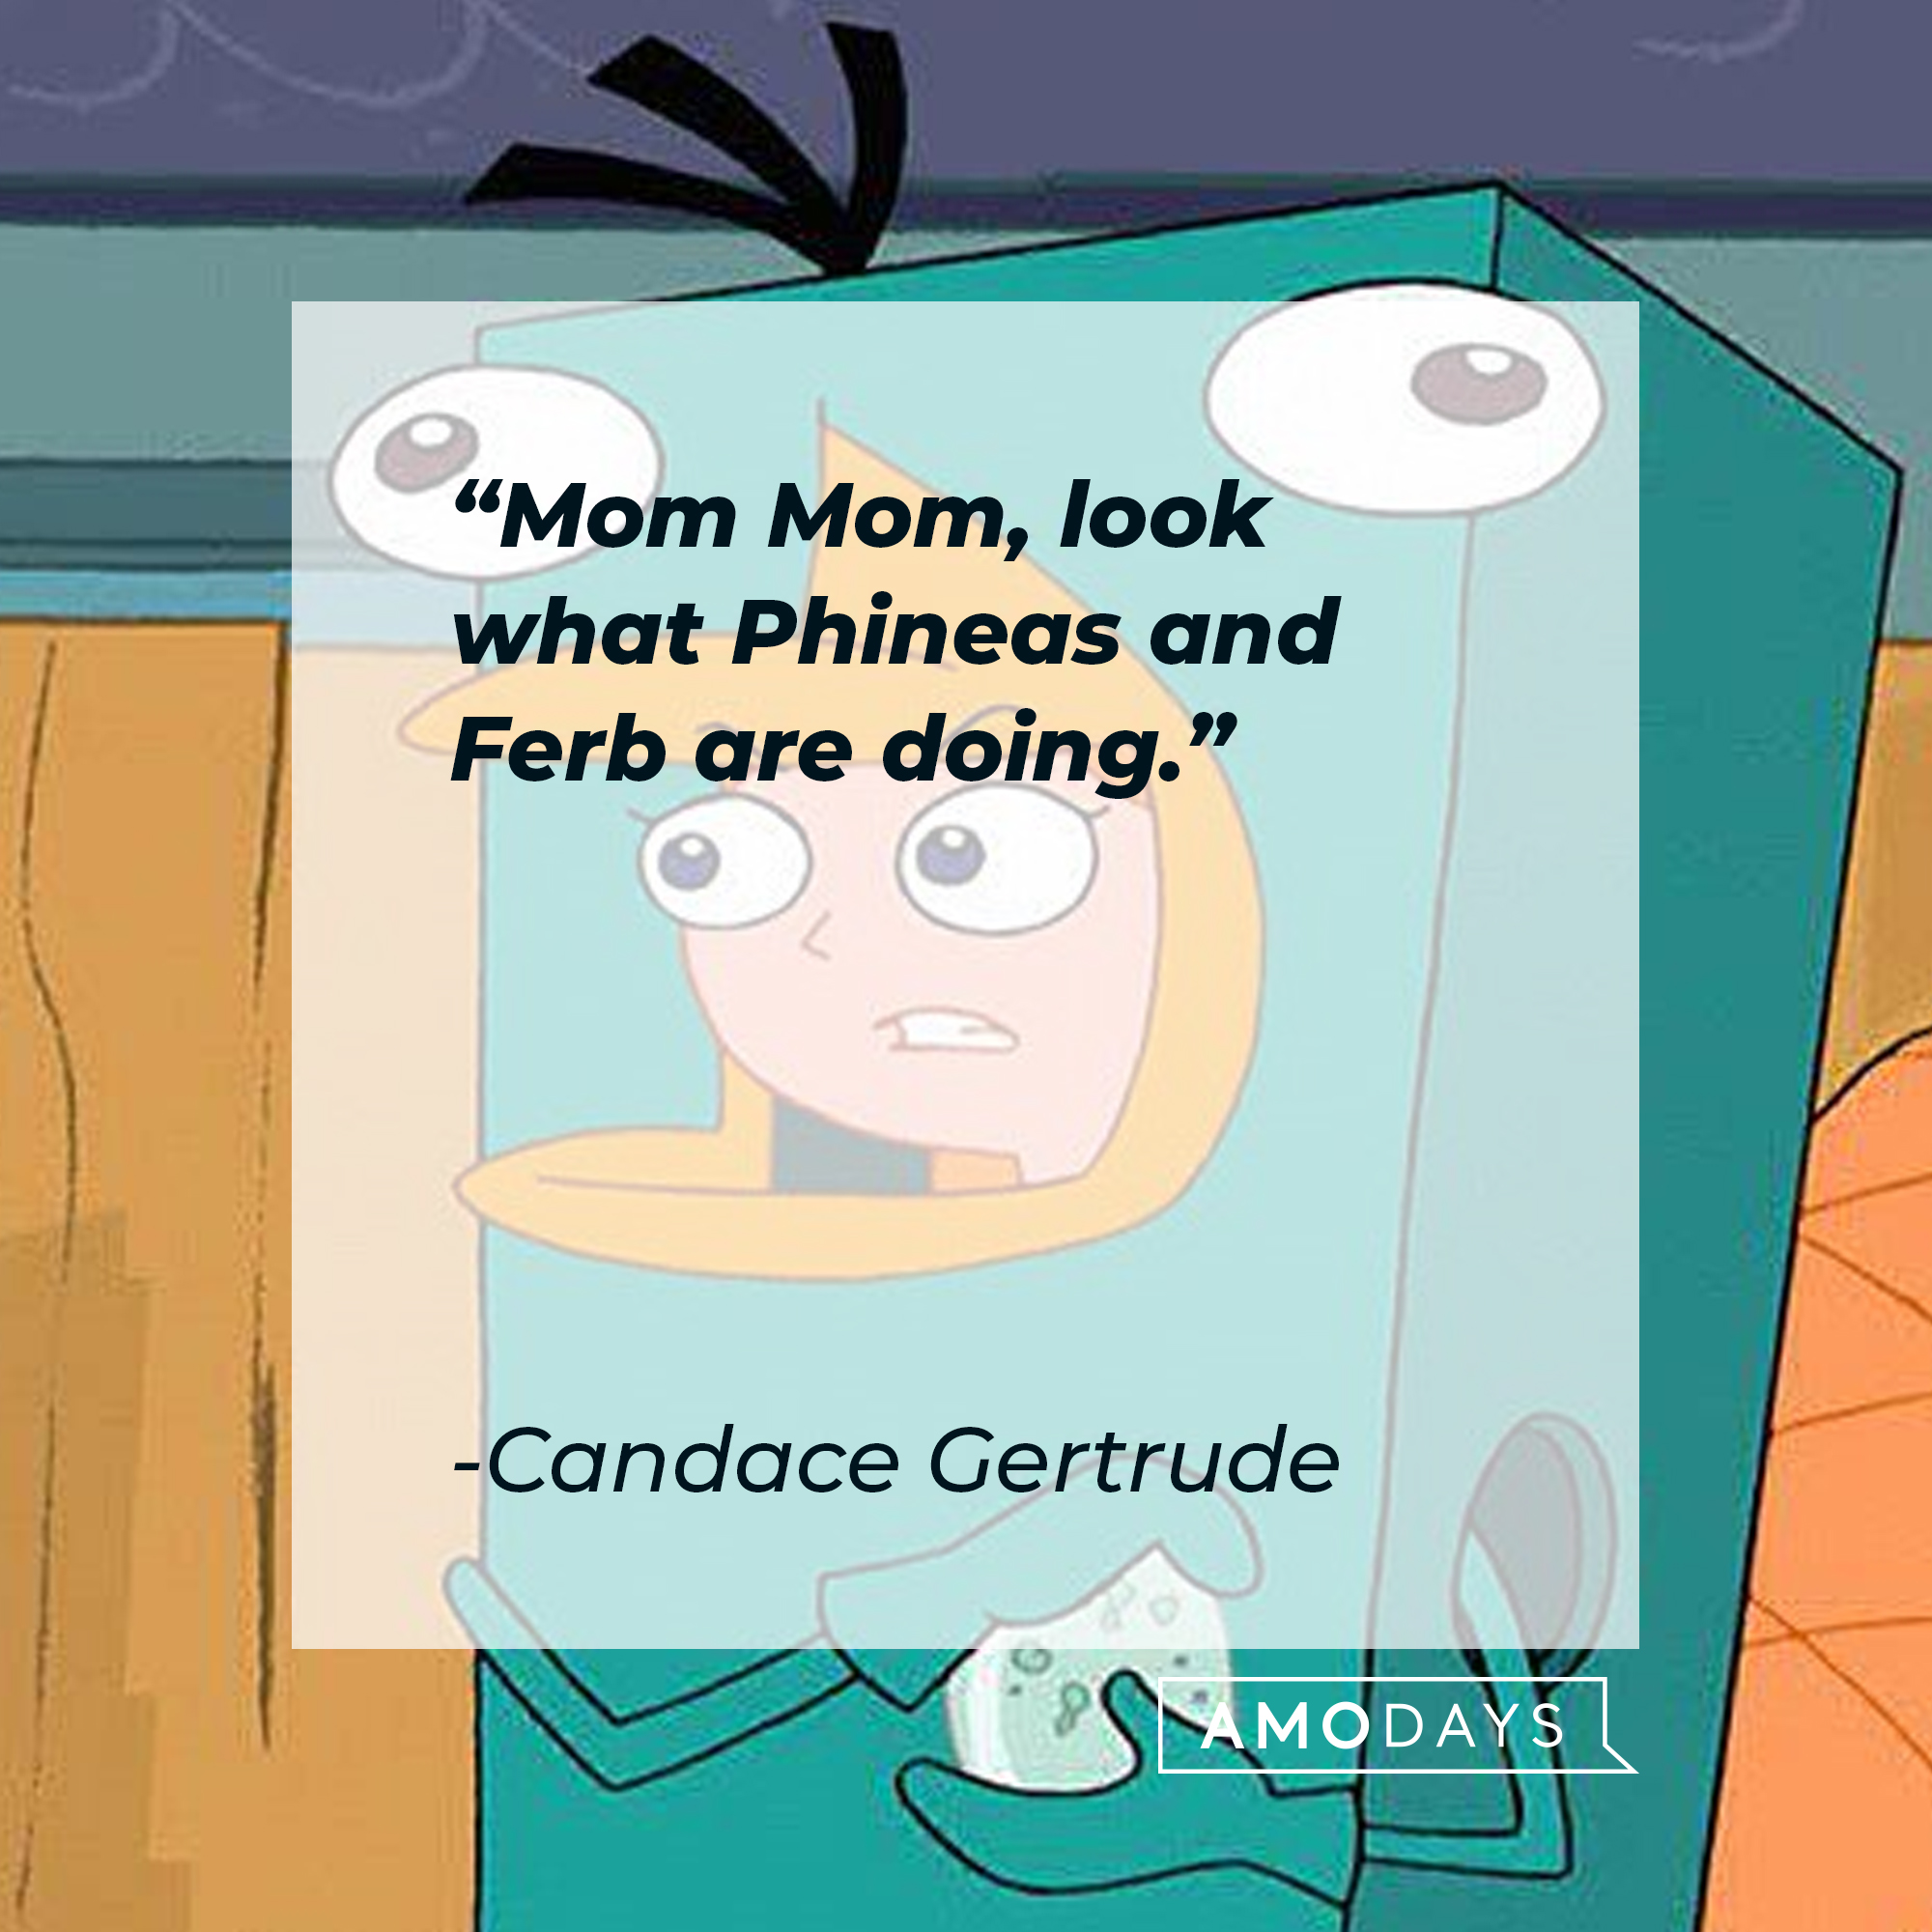 Candace Gertrude's quote: "Mom Mom, look what Phineas and Ferb are doing." | Source: facebook.com/Phineas-and-Ferb